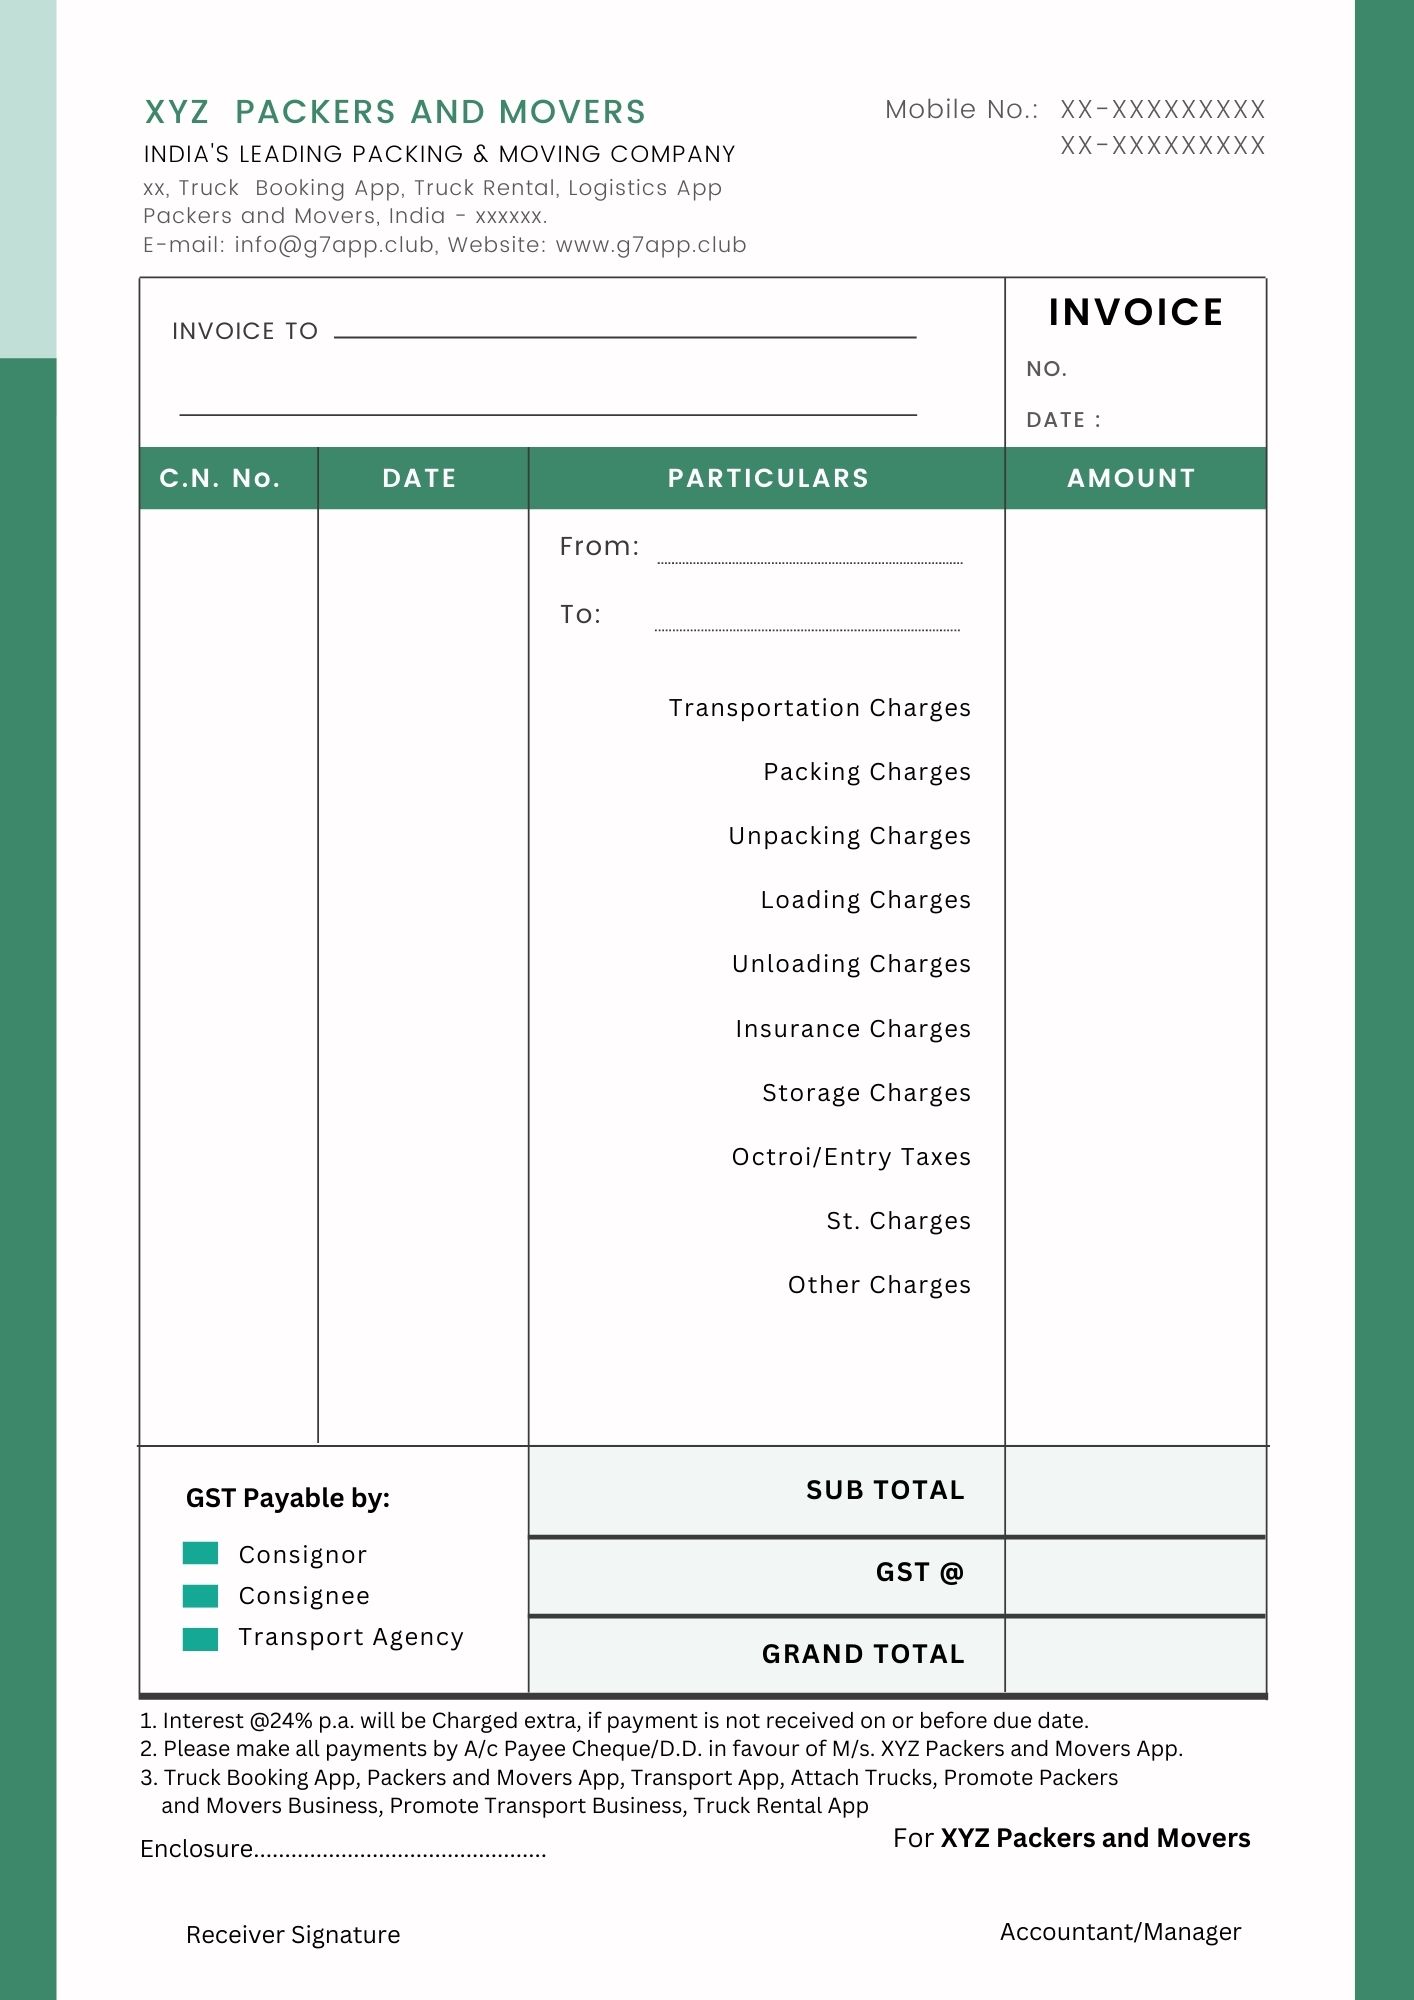 'Pdf Format of Packers and Movers Invoice and Bill'